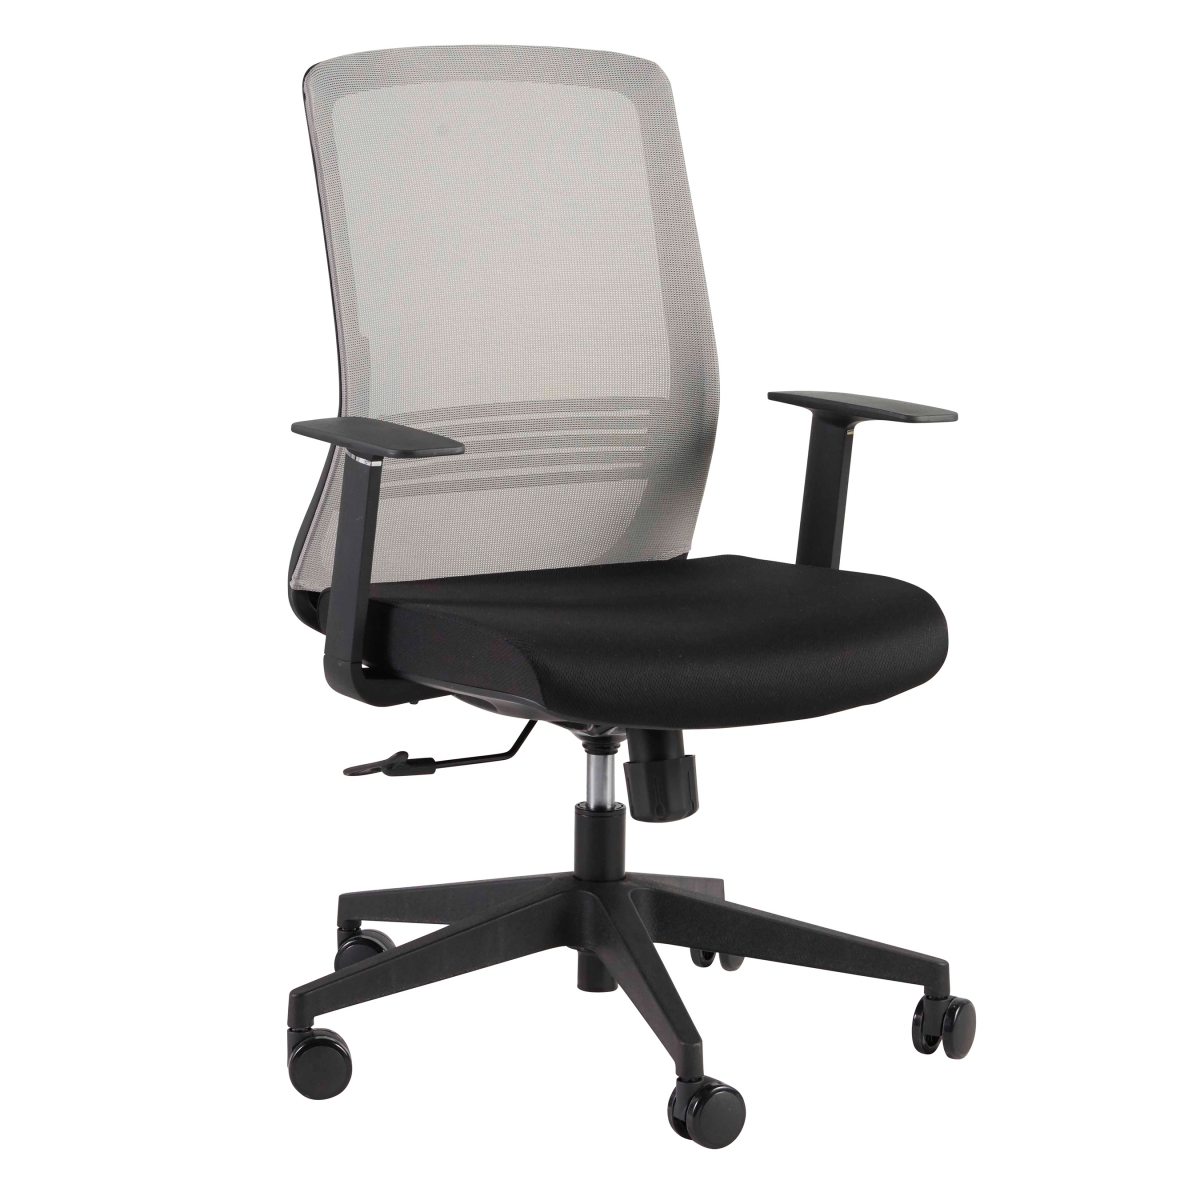 Spiro Office Chair With Adjustable Arms with black and gray mesh shown here.